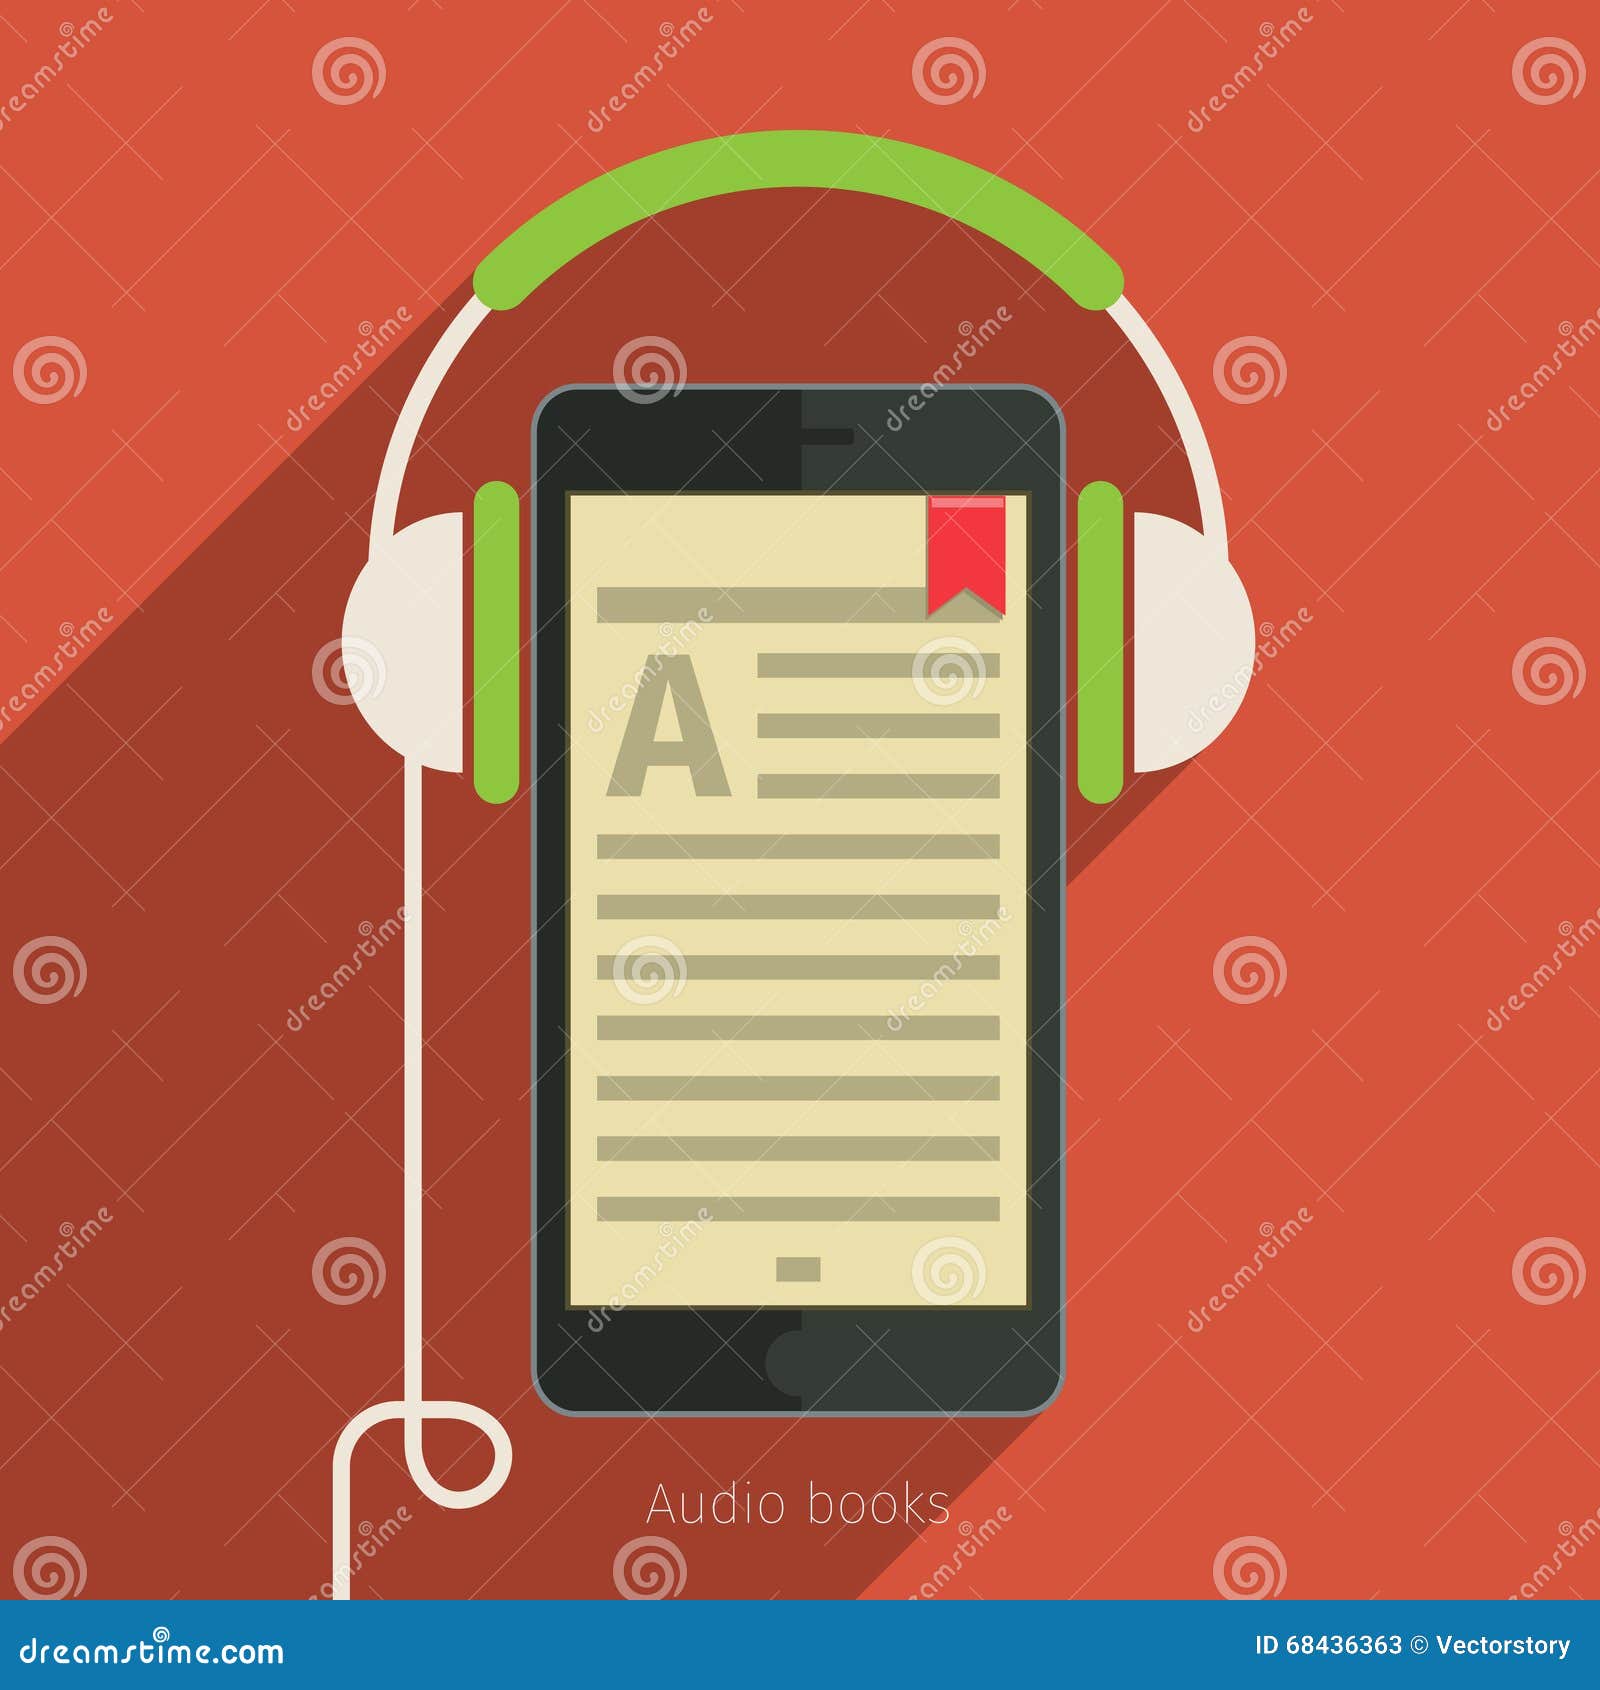 E-book Audio Learning Languages And Books 3d Render On ...